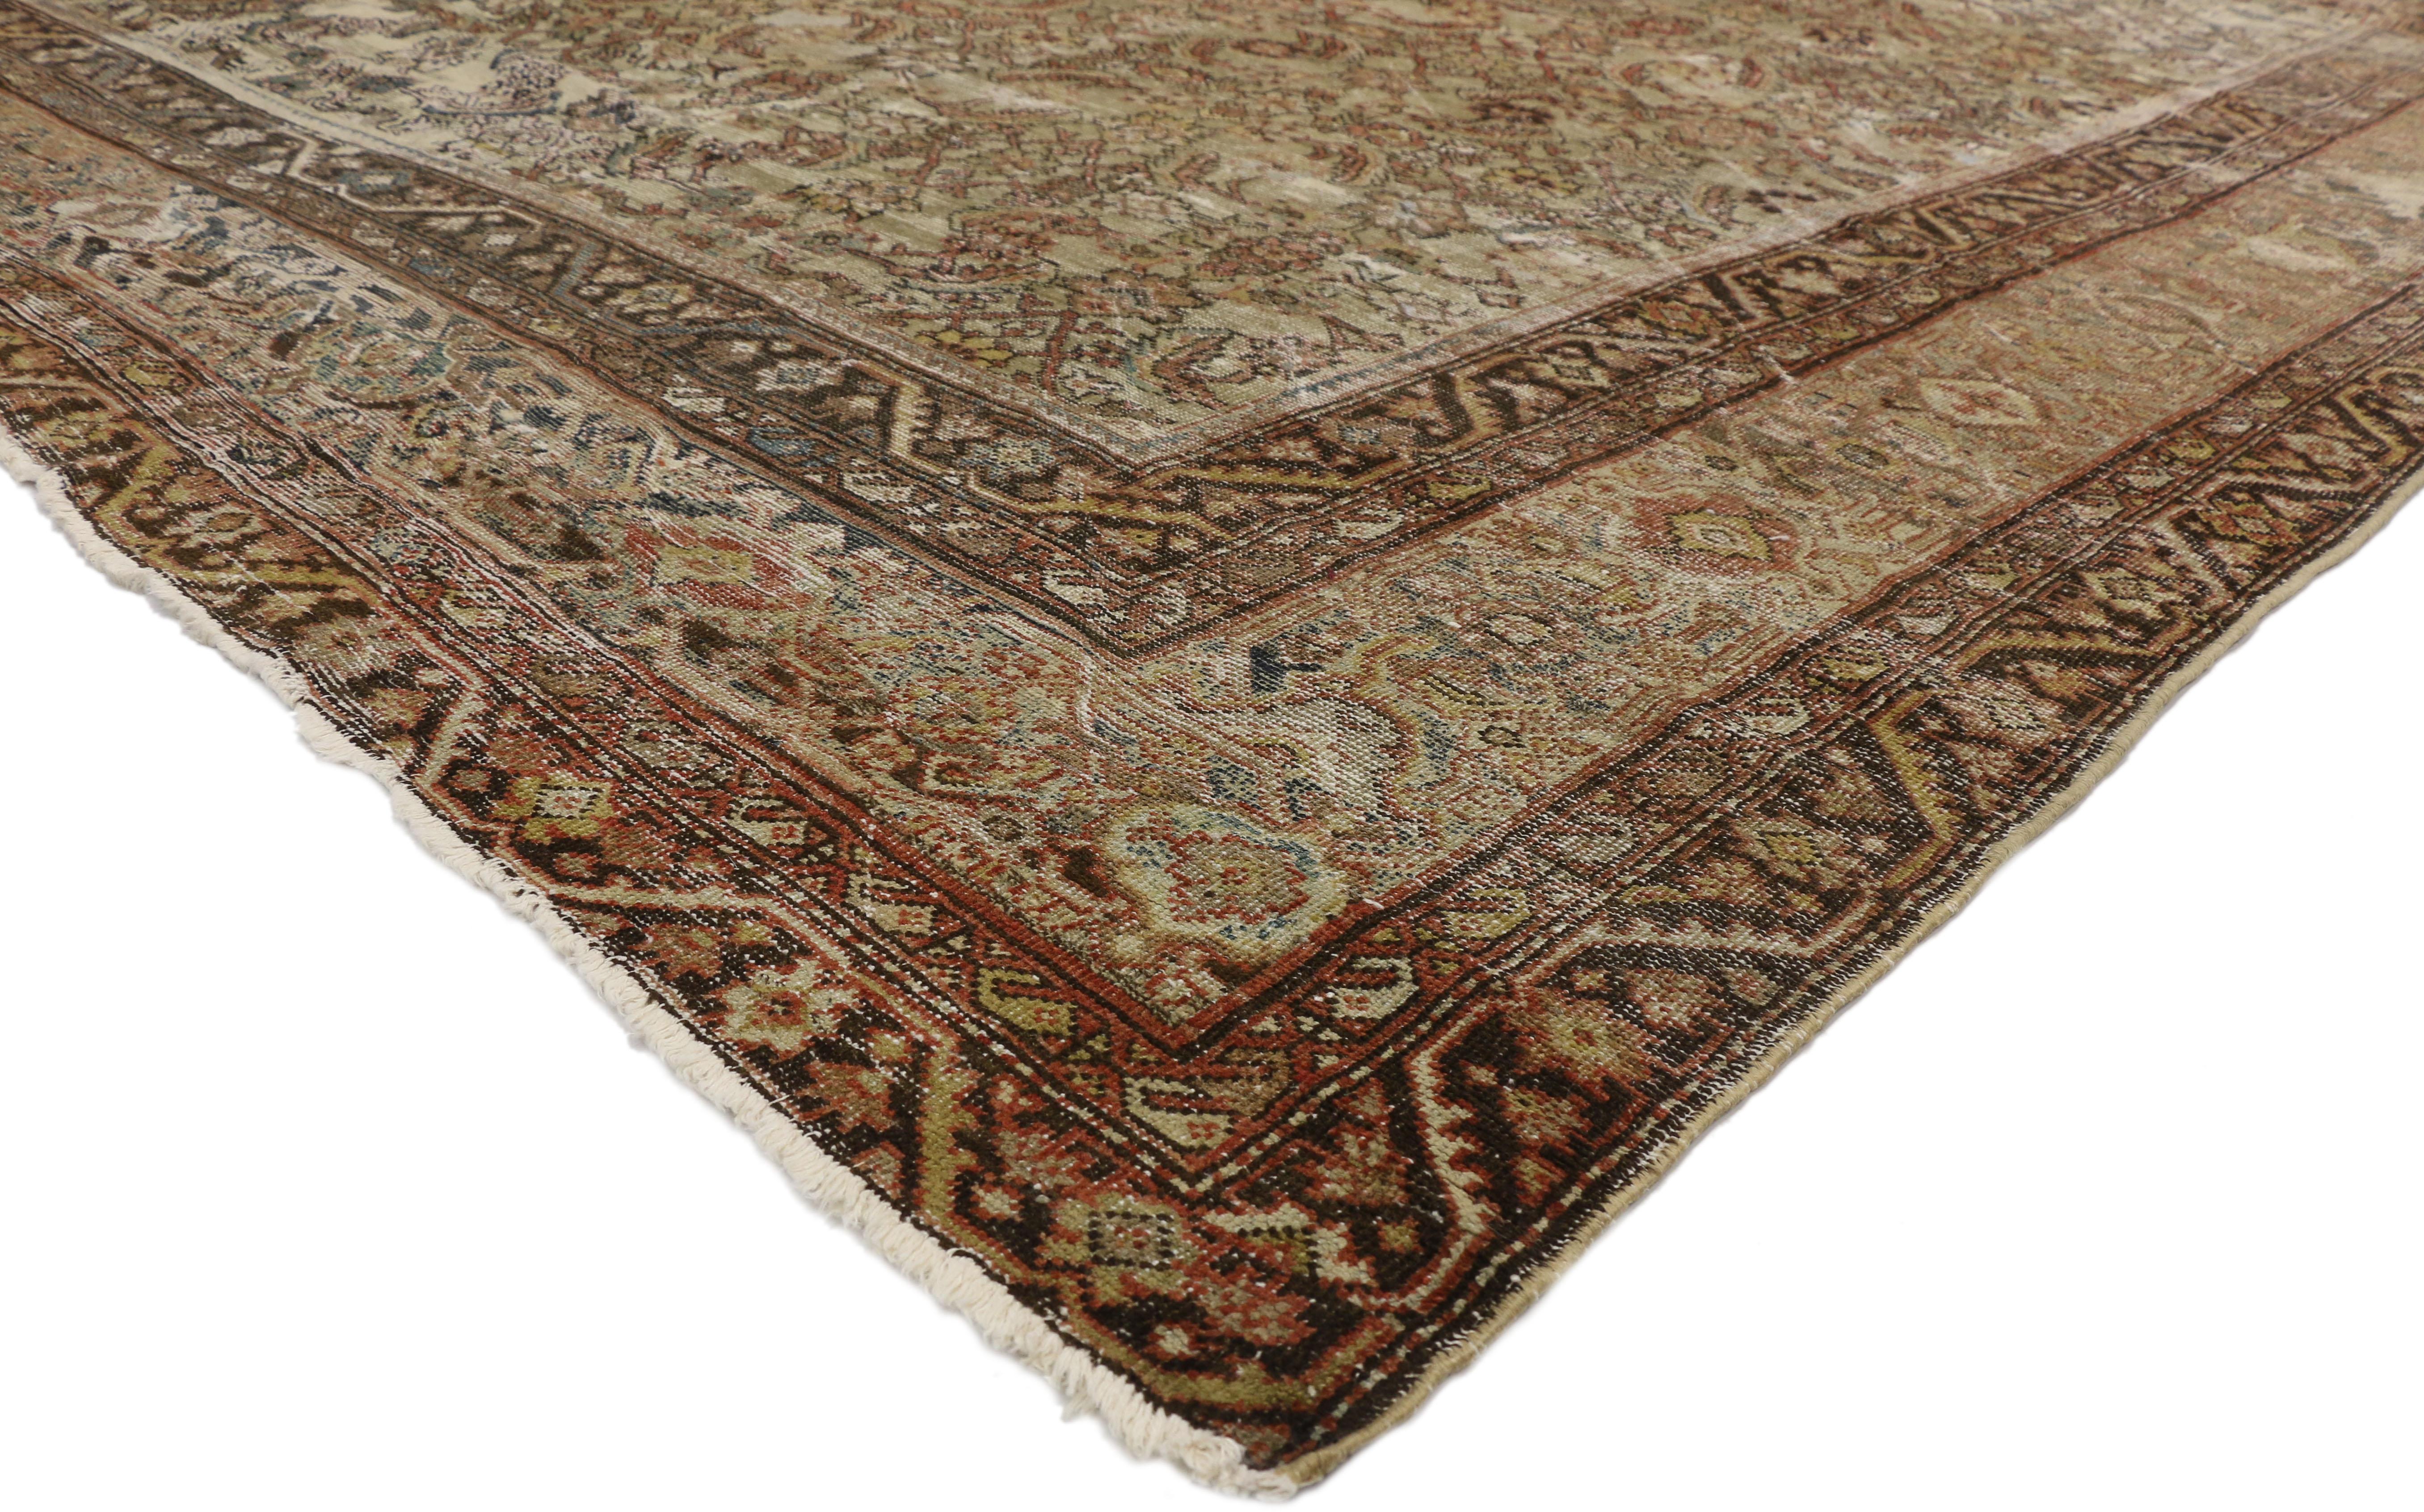 73160 Distressed Antique Persian Sultanabad Rug with Modern Rustic Industrial Style 10'00 x 12'08. ​​With its historical richness and artful craftsmanship combined with cozy casual living and earth-tone colors, this hand-knotted wool distressed